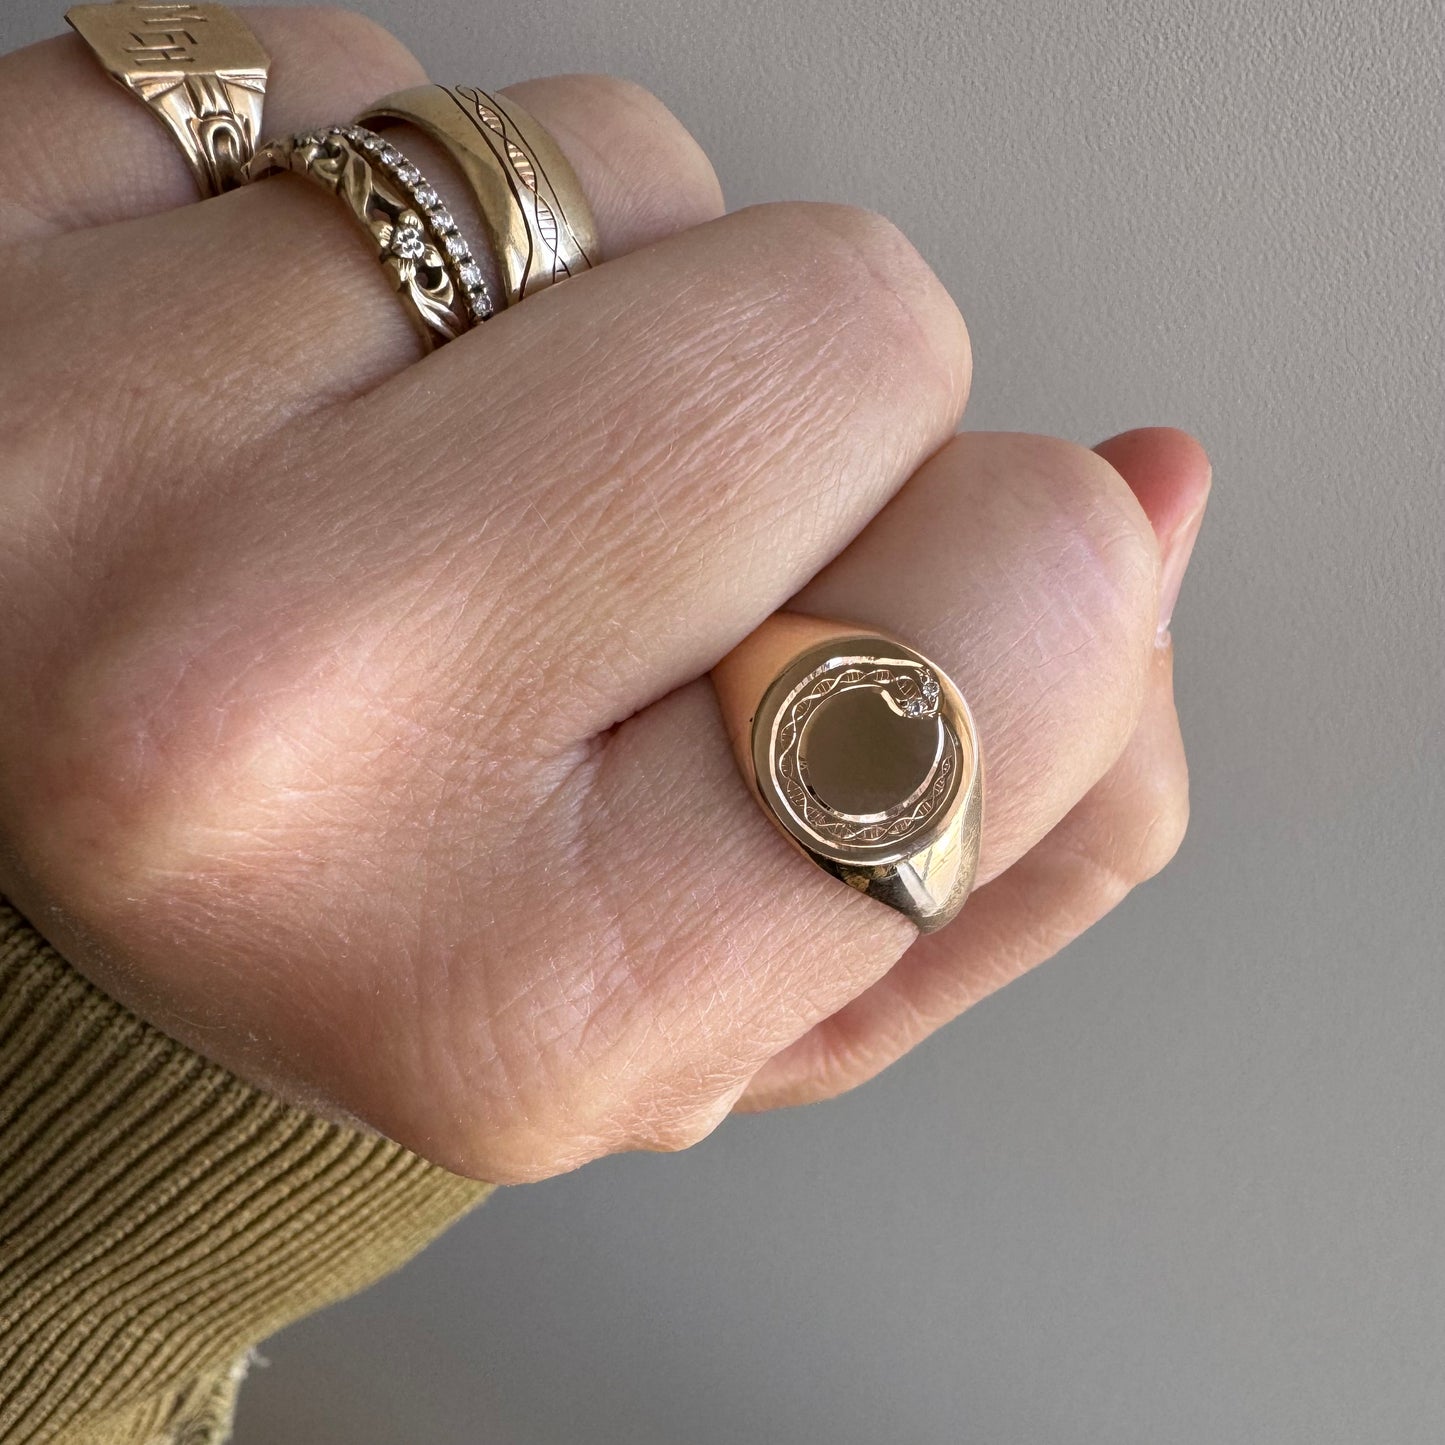 reimagined A N T I Q U E // ouroboros cycle / 10k rosy gold round signet with engraved snake and diamonds / size 9.25 to 9.5